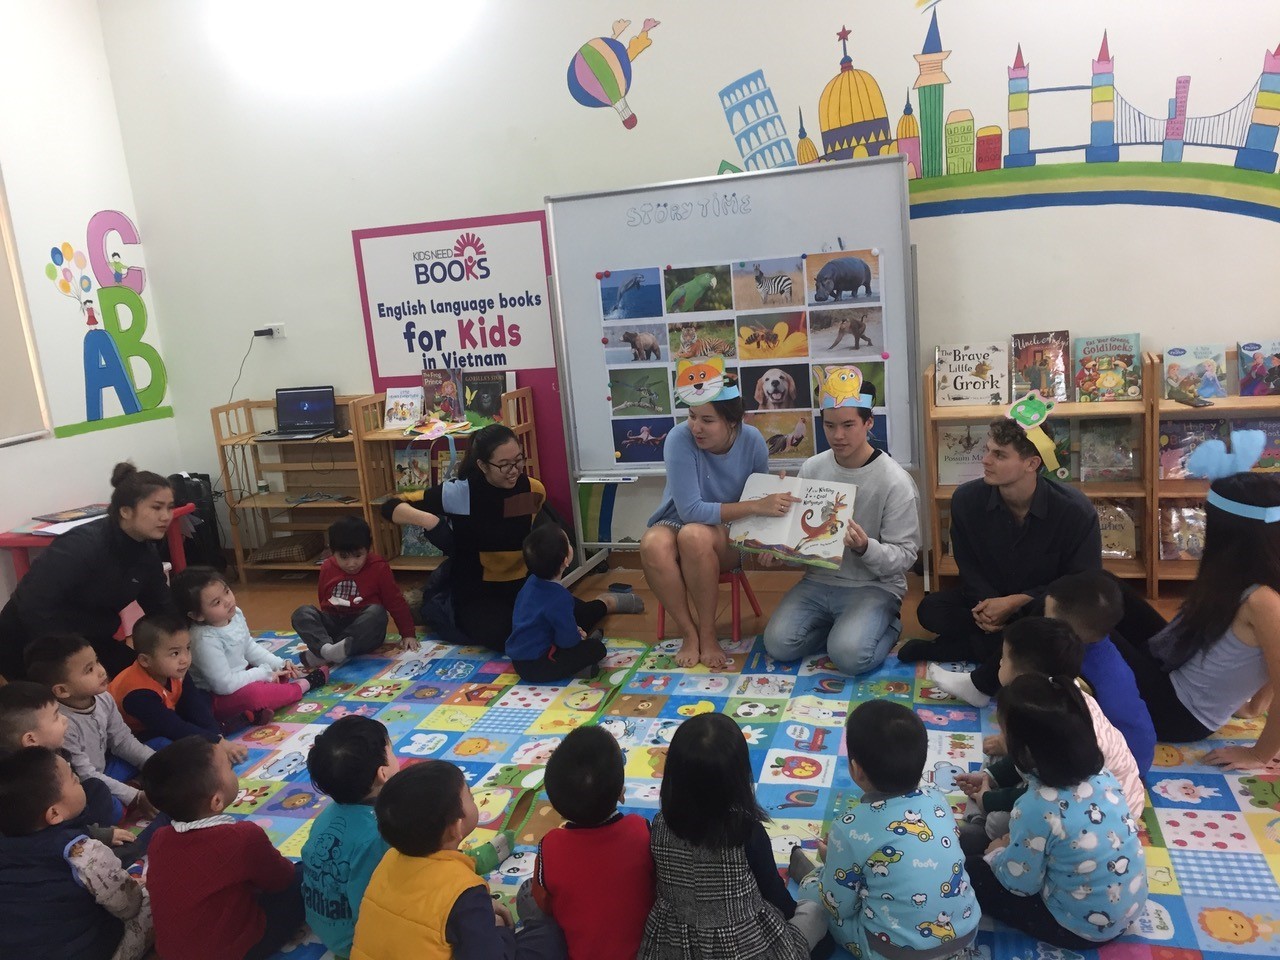 University of Sydney students (L-R) Louisa, Mike, Max and Natasha, leading story time with Vietnamese children at the Kids Needs Books social enterprise in Hanoi.